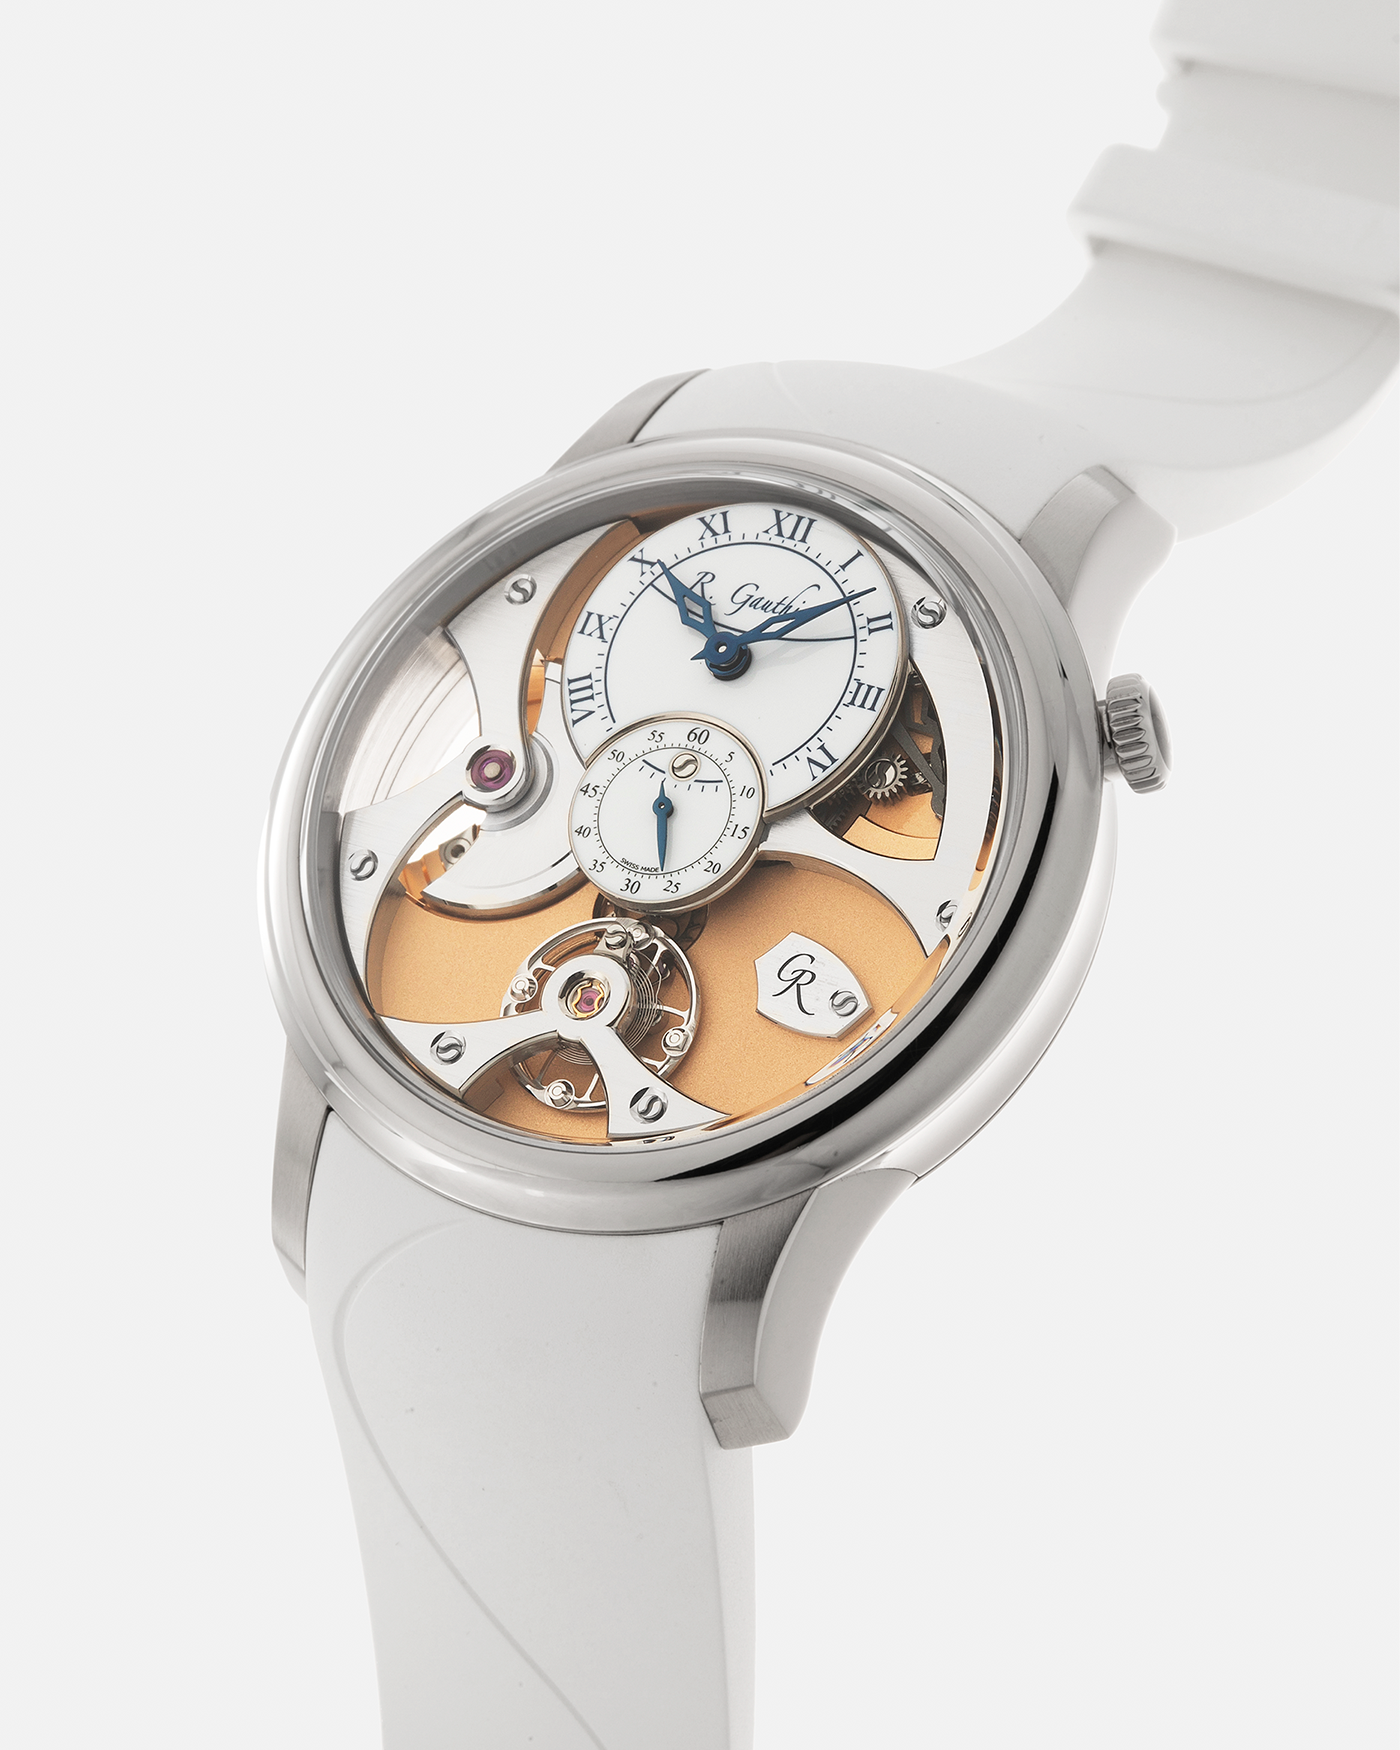 Brand: Romain Gauthier Year: 2023 Model: Insight Micro-Rotor, Limited Edition of 10 Pieces in this Configuration Reference Number: MON00360 Material: 18-carat White Gold Case, Oven-Fired Grand Feu White Enamel Dial Movement: Romain Gauthier Insight Micro-Rotor Caliber, Self-Winding Case Dimensions: 39.5mm x 12.9mm Strap: Romain Gauthier White Rubber Strap with Signed 18-carat White Gold Tang Buckle and Additional Romain Gauthier Brown Alligator Strap